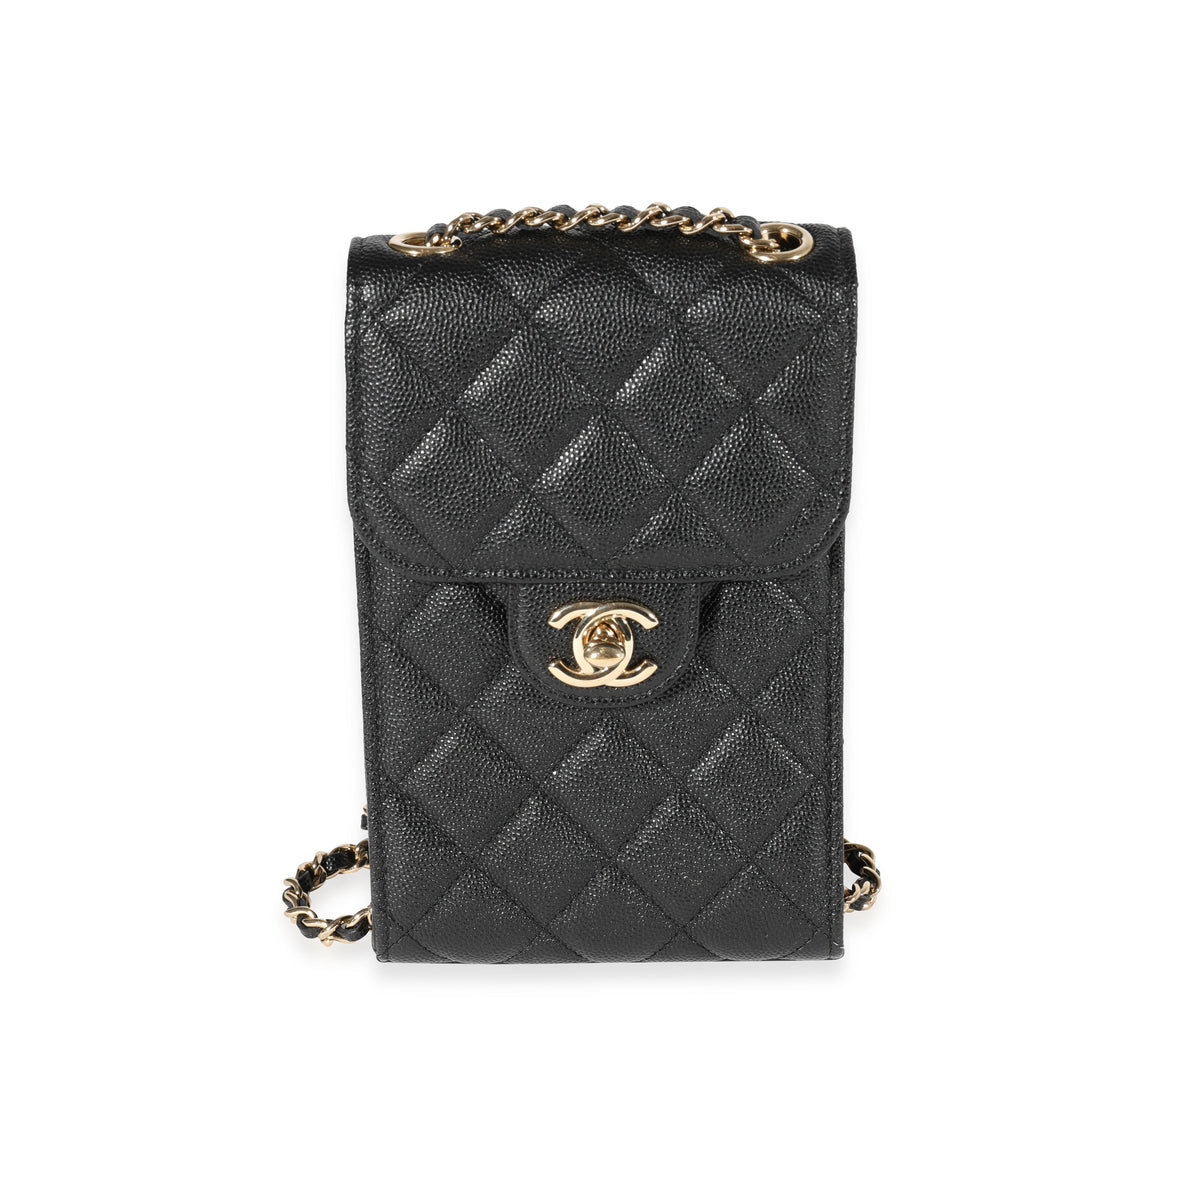 Chanel Black Quilted Caviar Phone Holder with Chain, myGemma